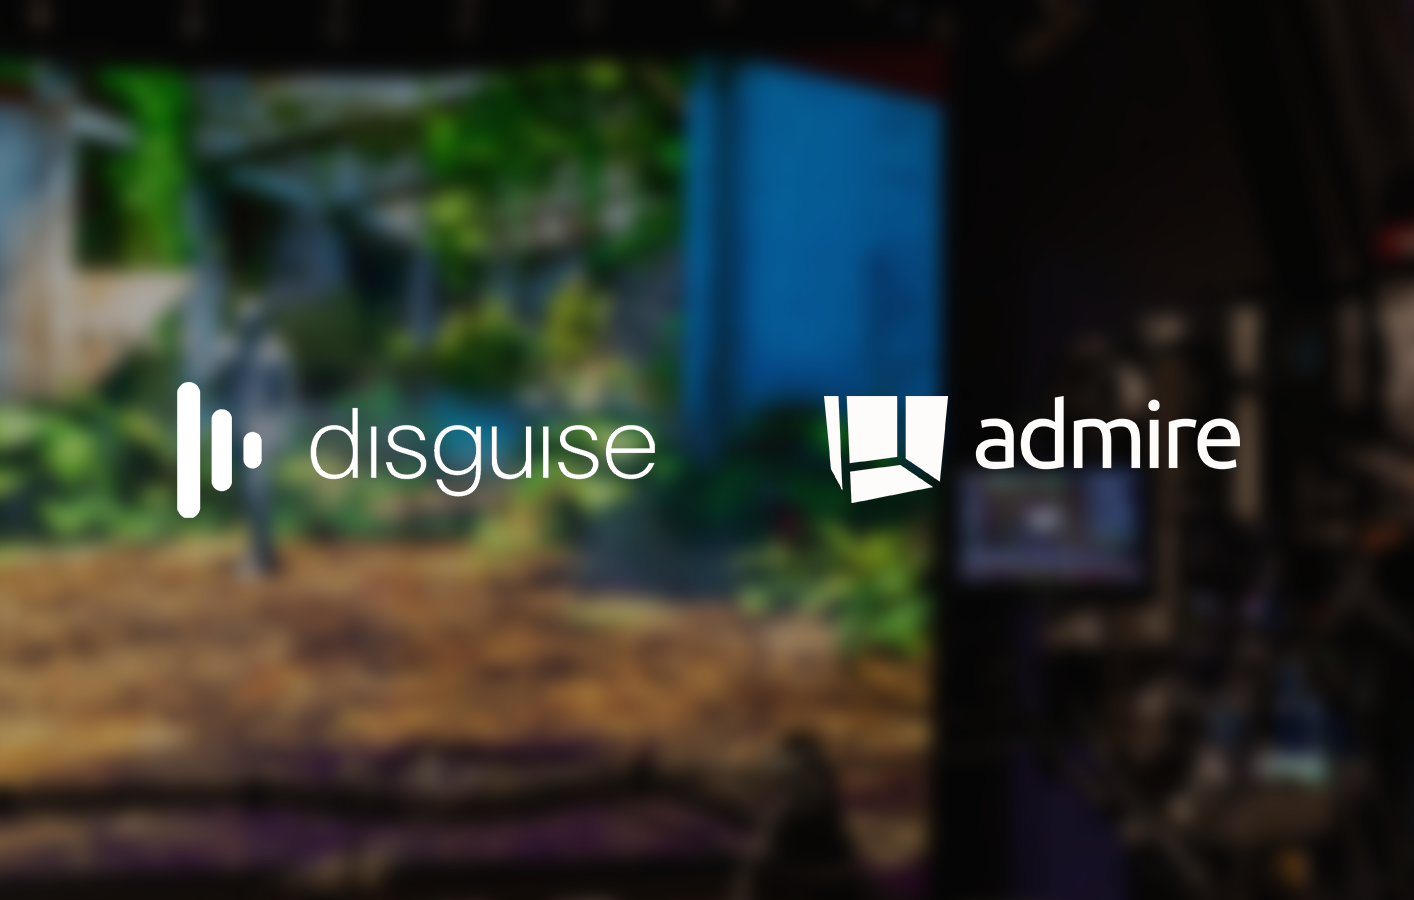 disguise participates in AdMiRe research project with the European Union programme